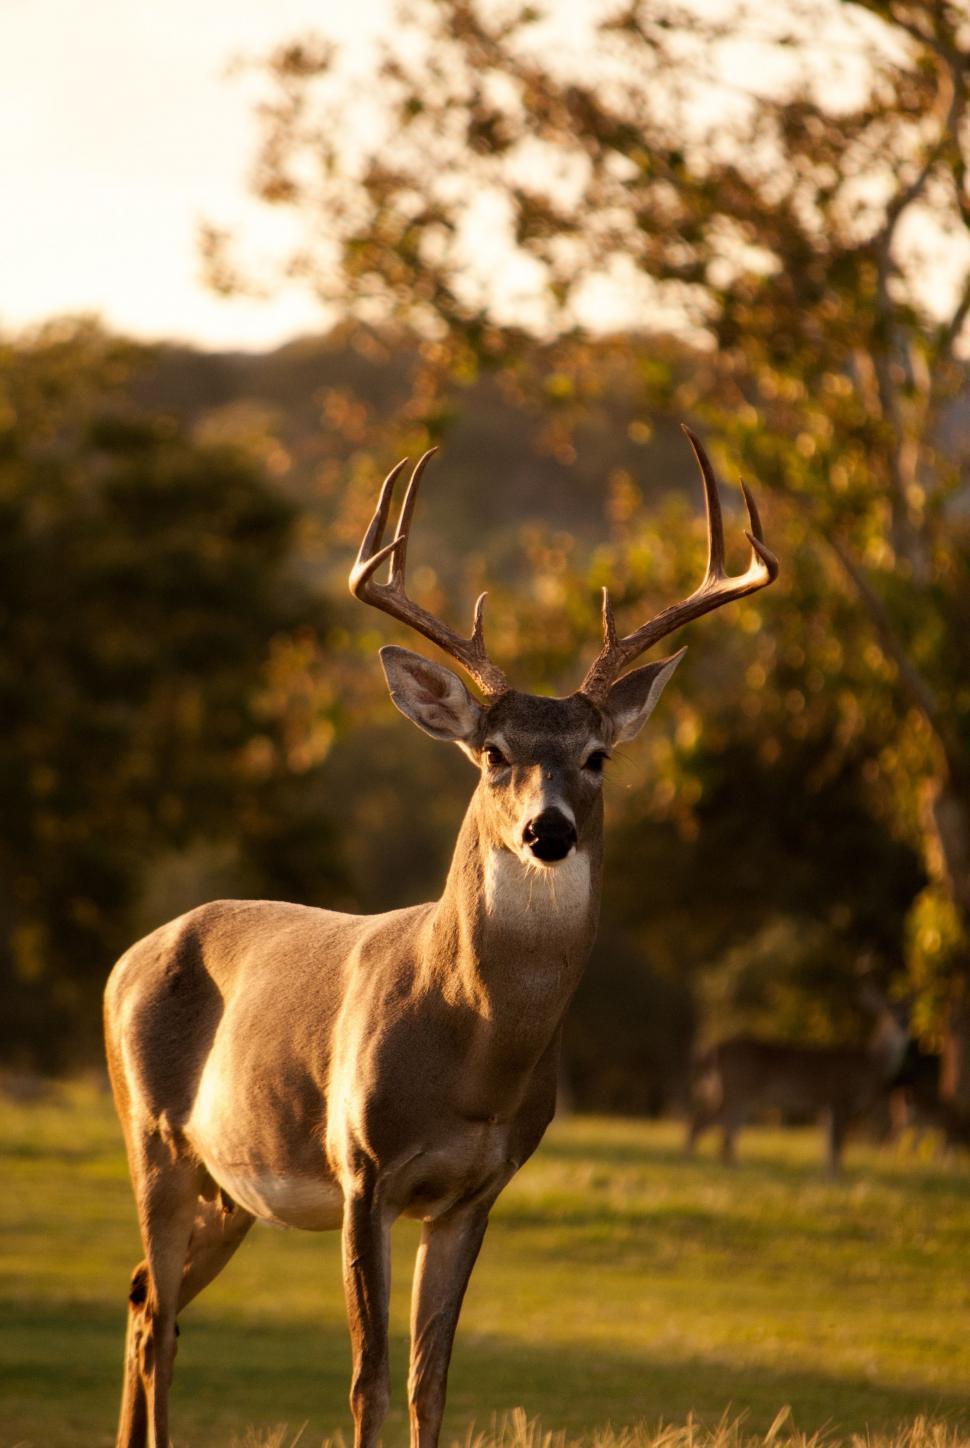 Free Image of Deer Standing in Field With Trees in Background 